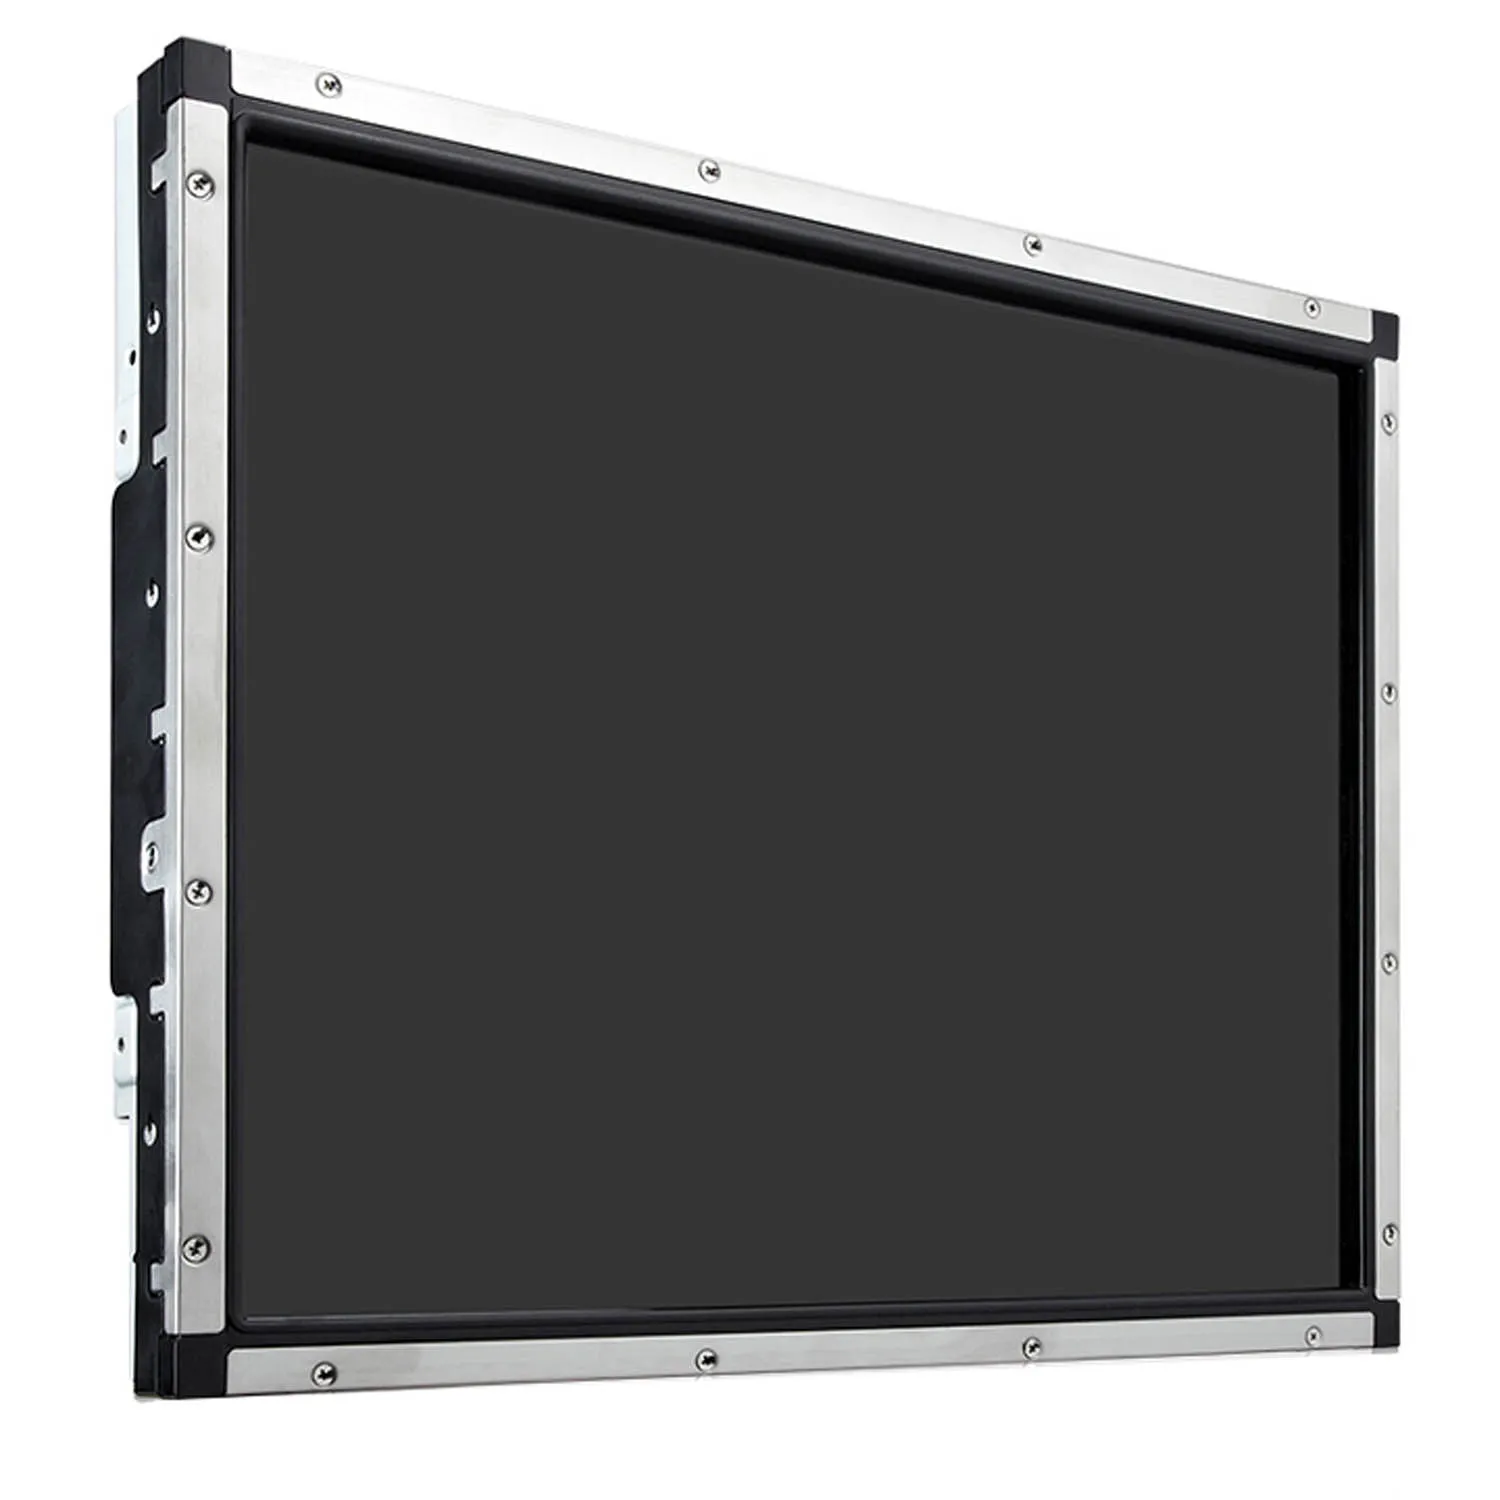 INDUSTRIAL OPEN FRAME NON-TOUCH MONITOR 17" KM-170-NW0S001